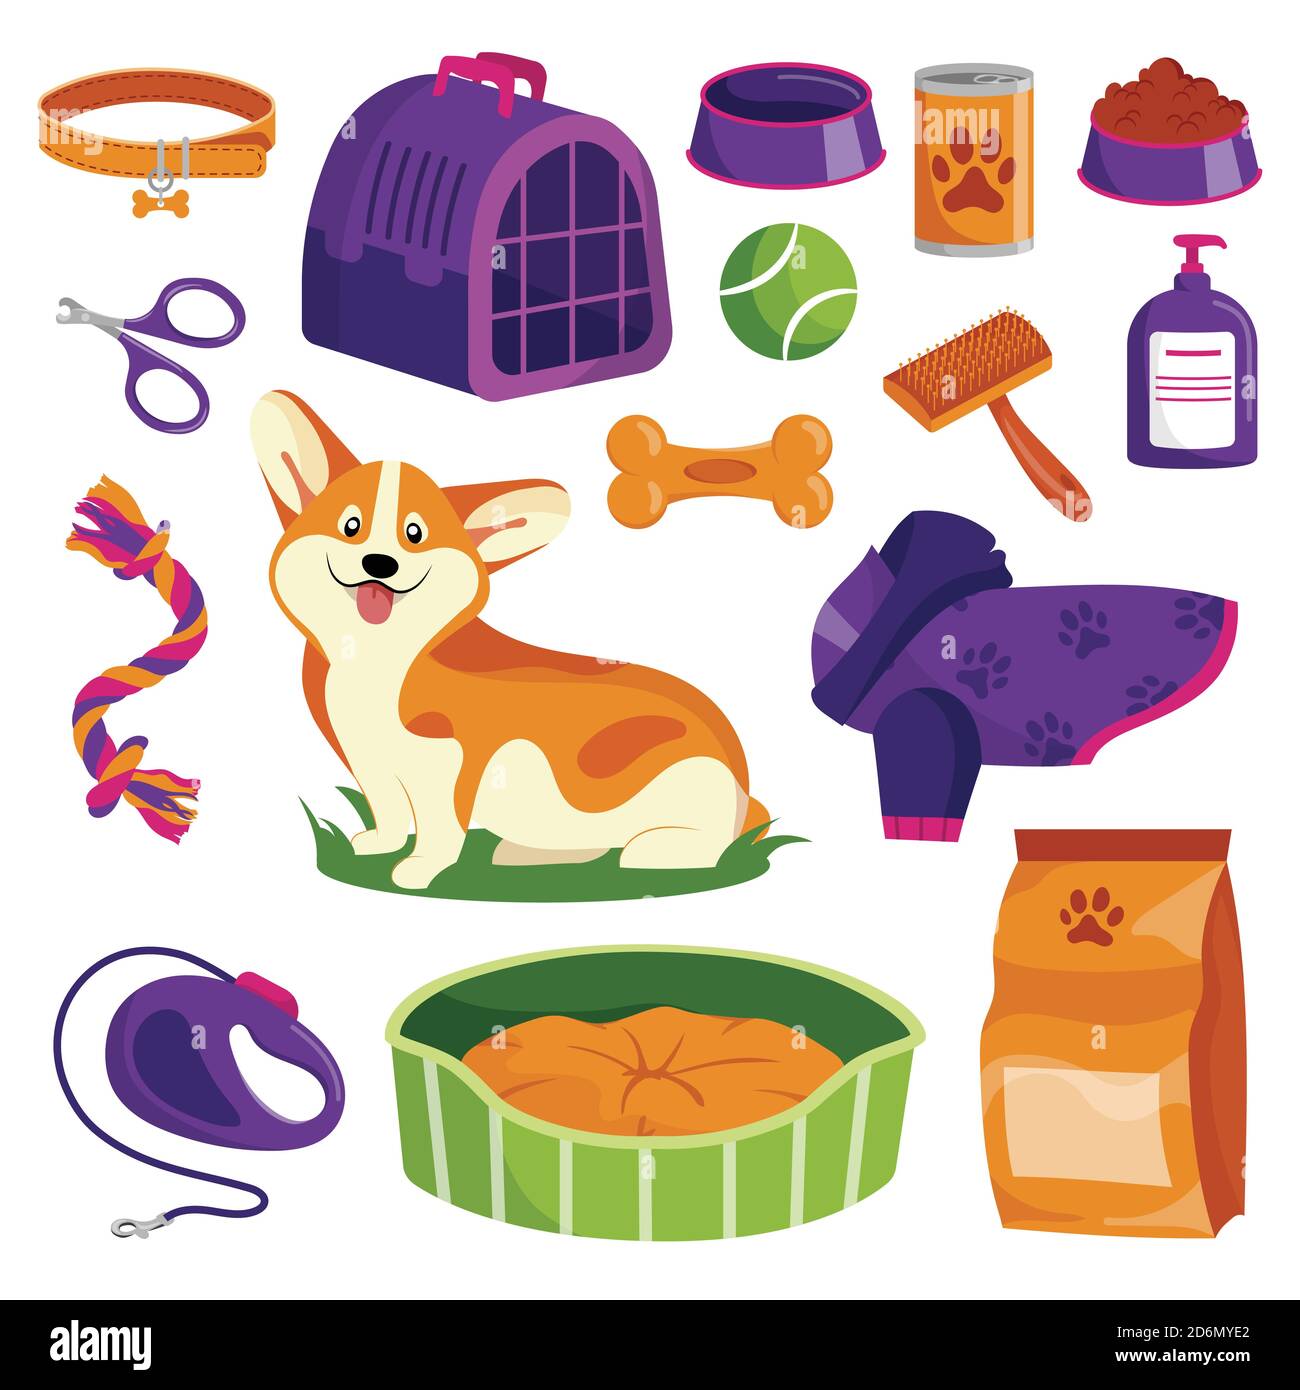 Pet shop icons set. Dog goods vector cartoon illustration. Animal food, toys, care and other stuff. Stock Vector